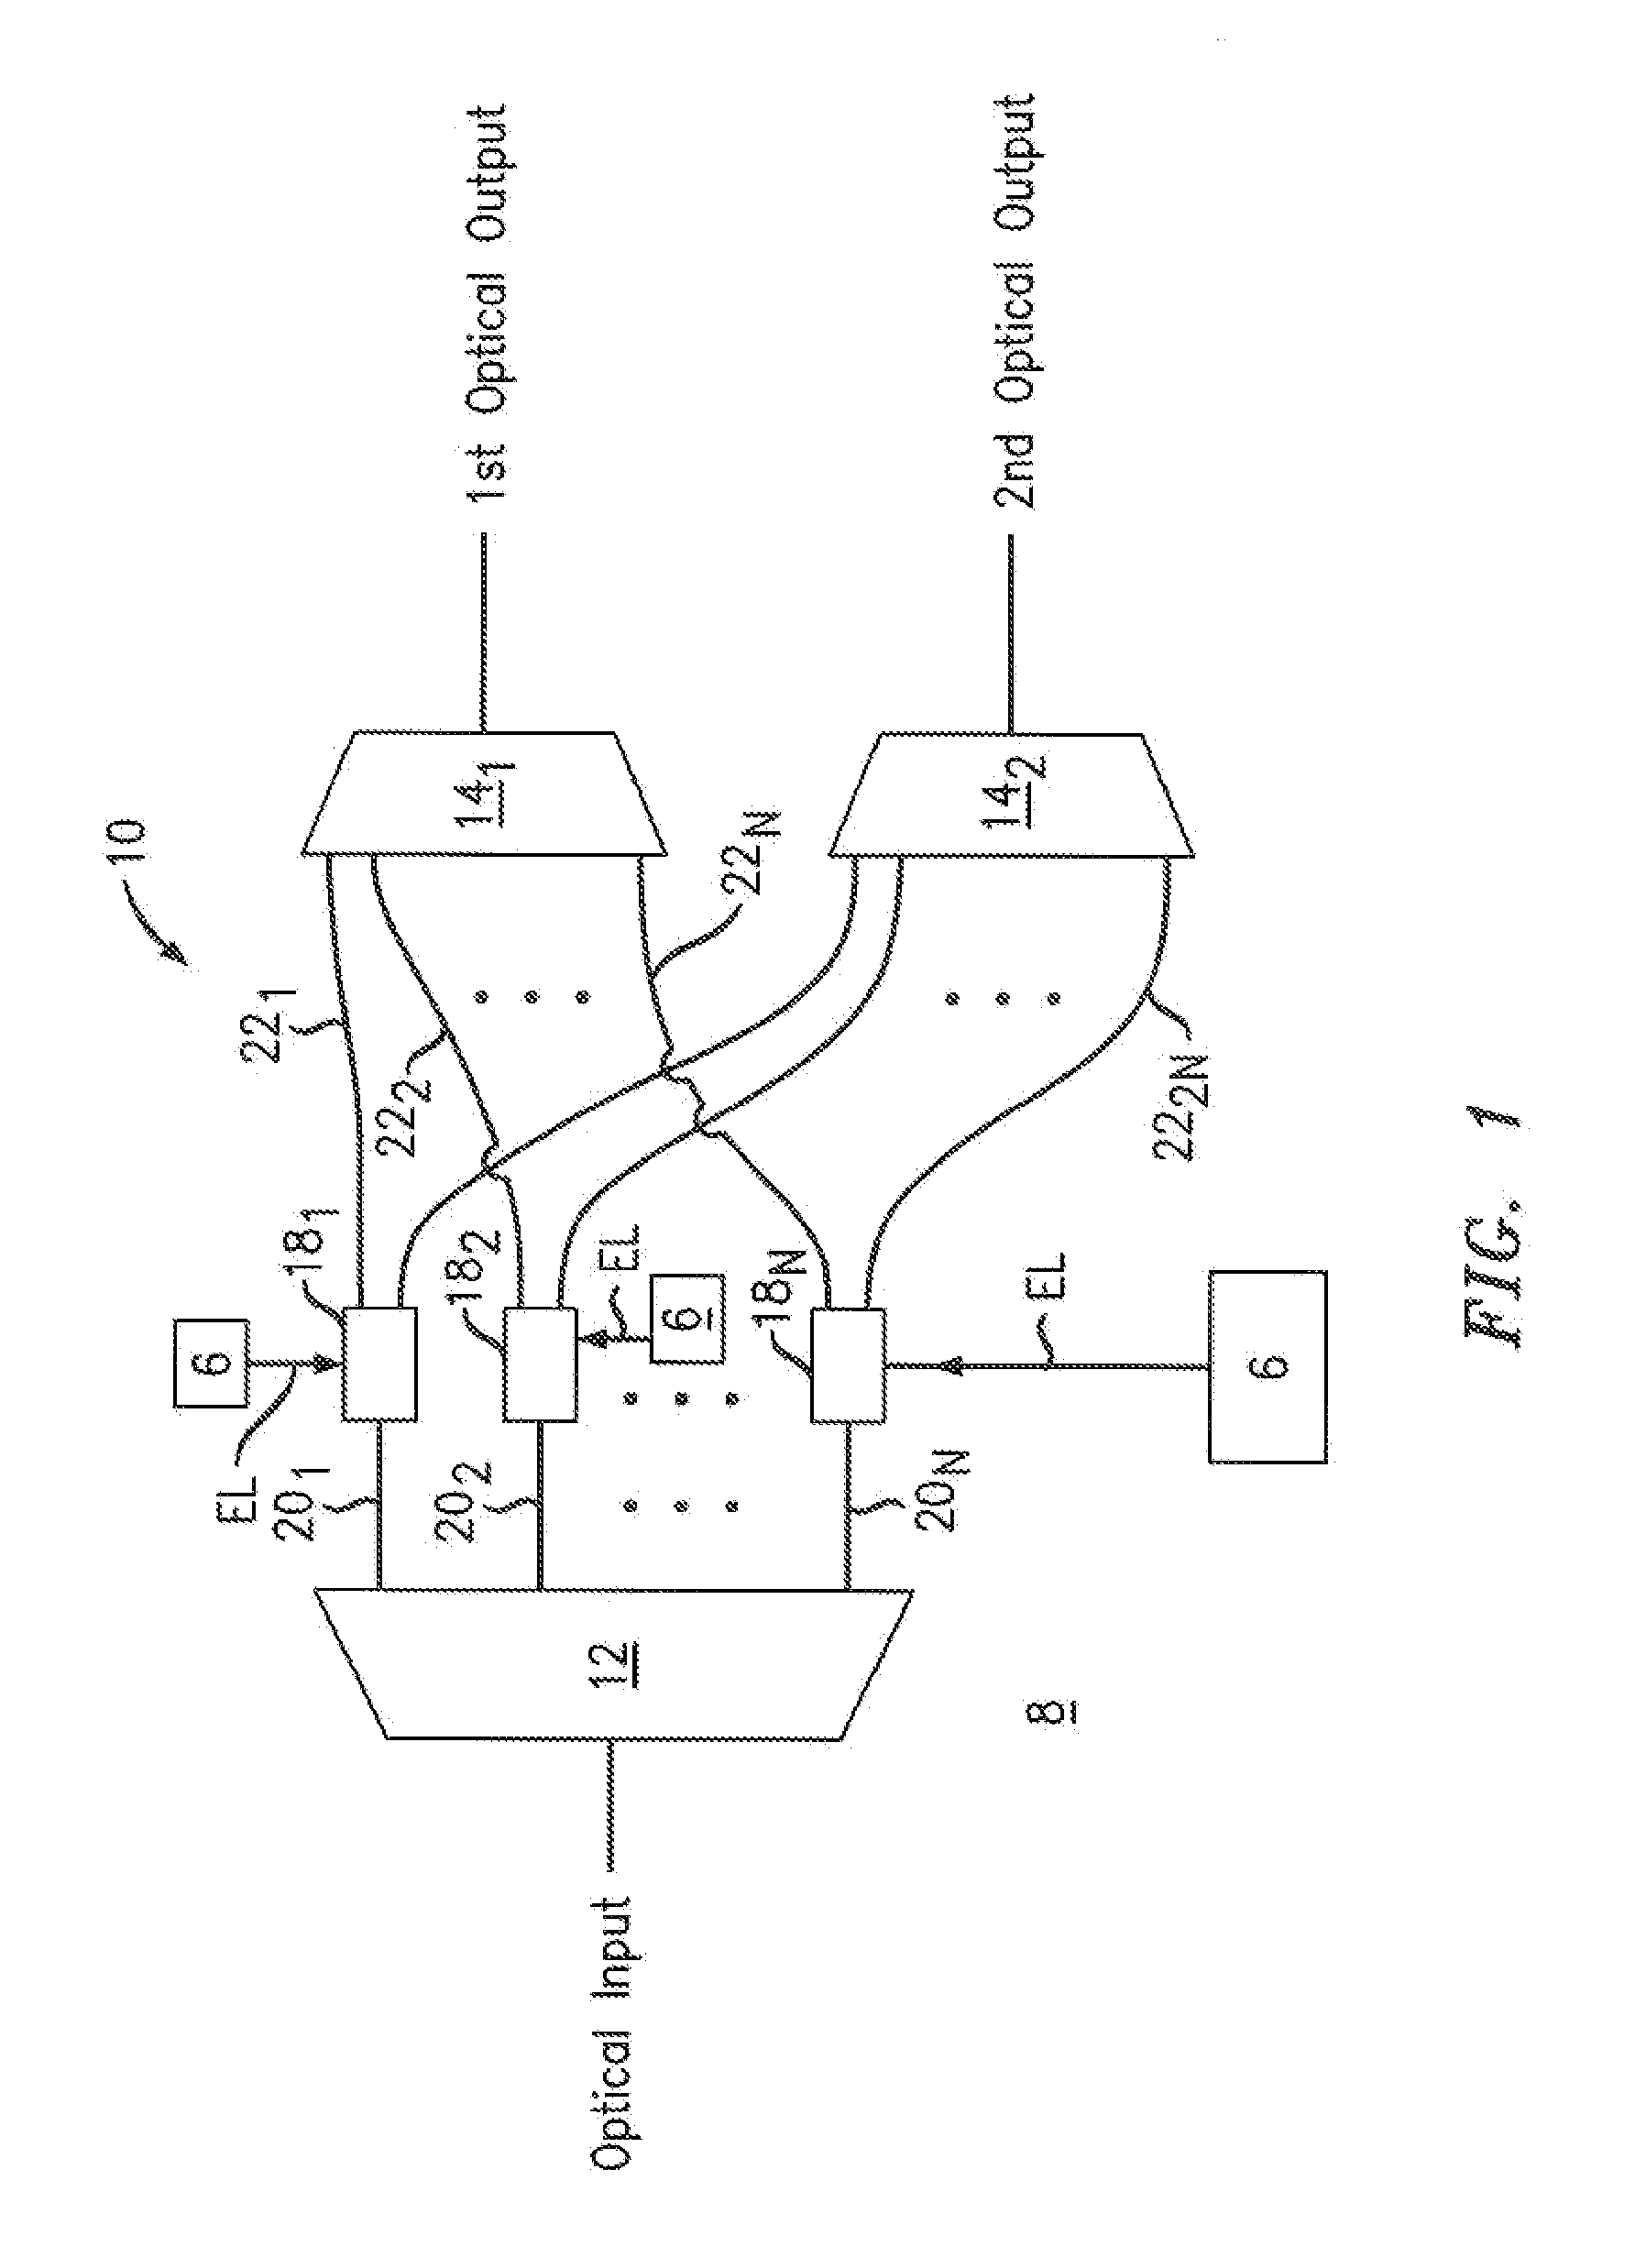 Adjustable Multiple-Channel Optical Switch